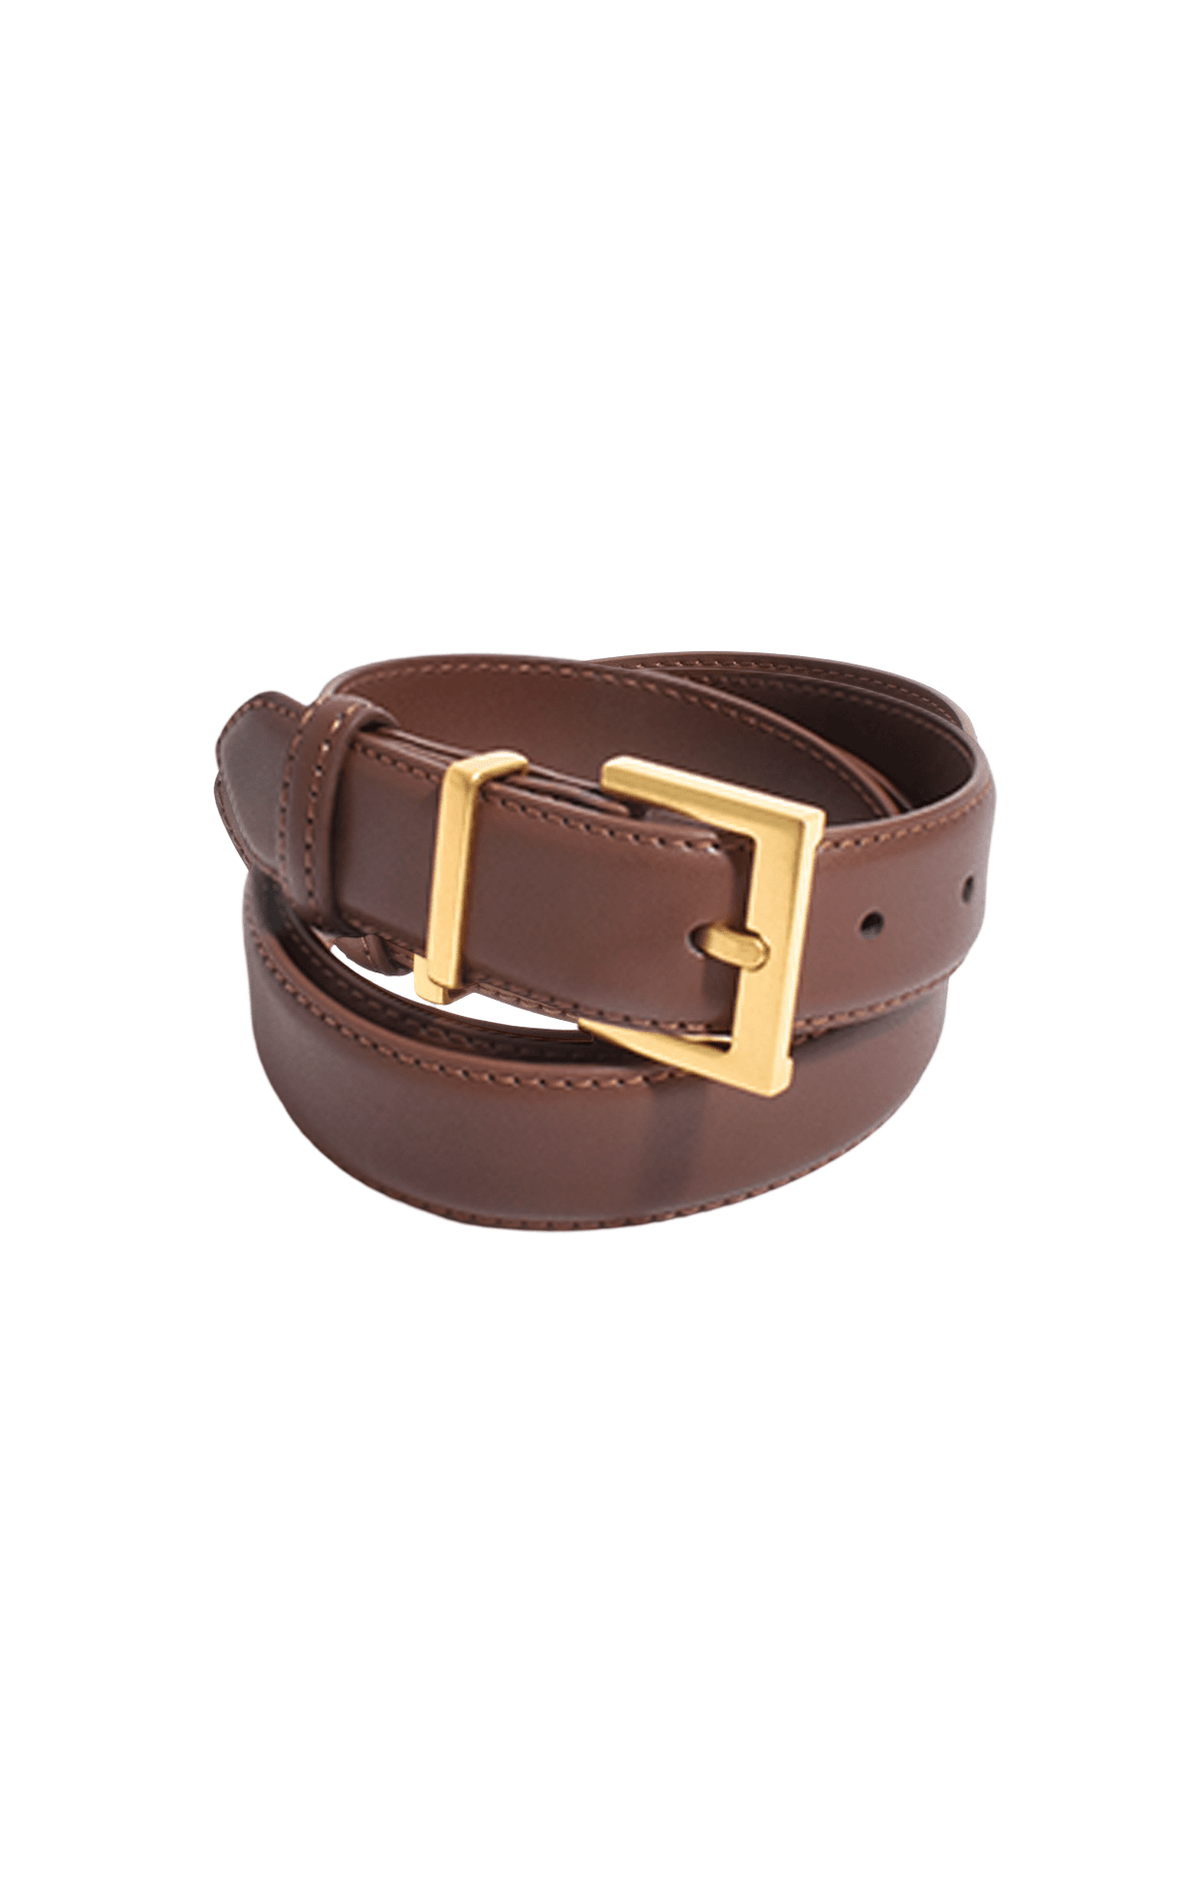 Belts OS / CHOCOLATE ARIEL SQUARE BUCKLE BELT IN CHOCOLATE